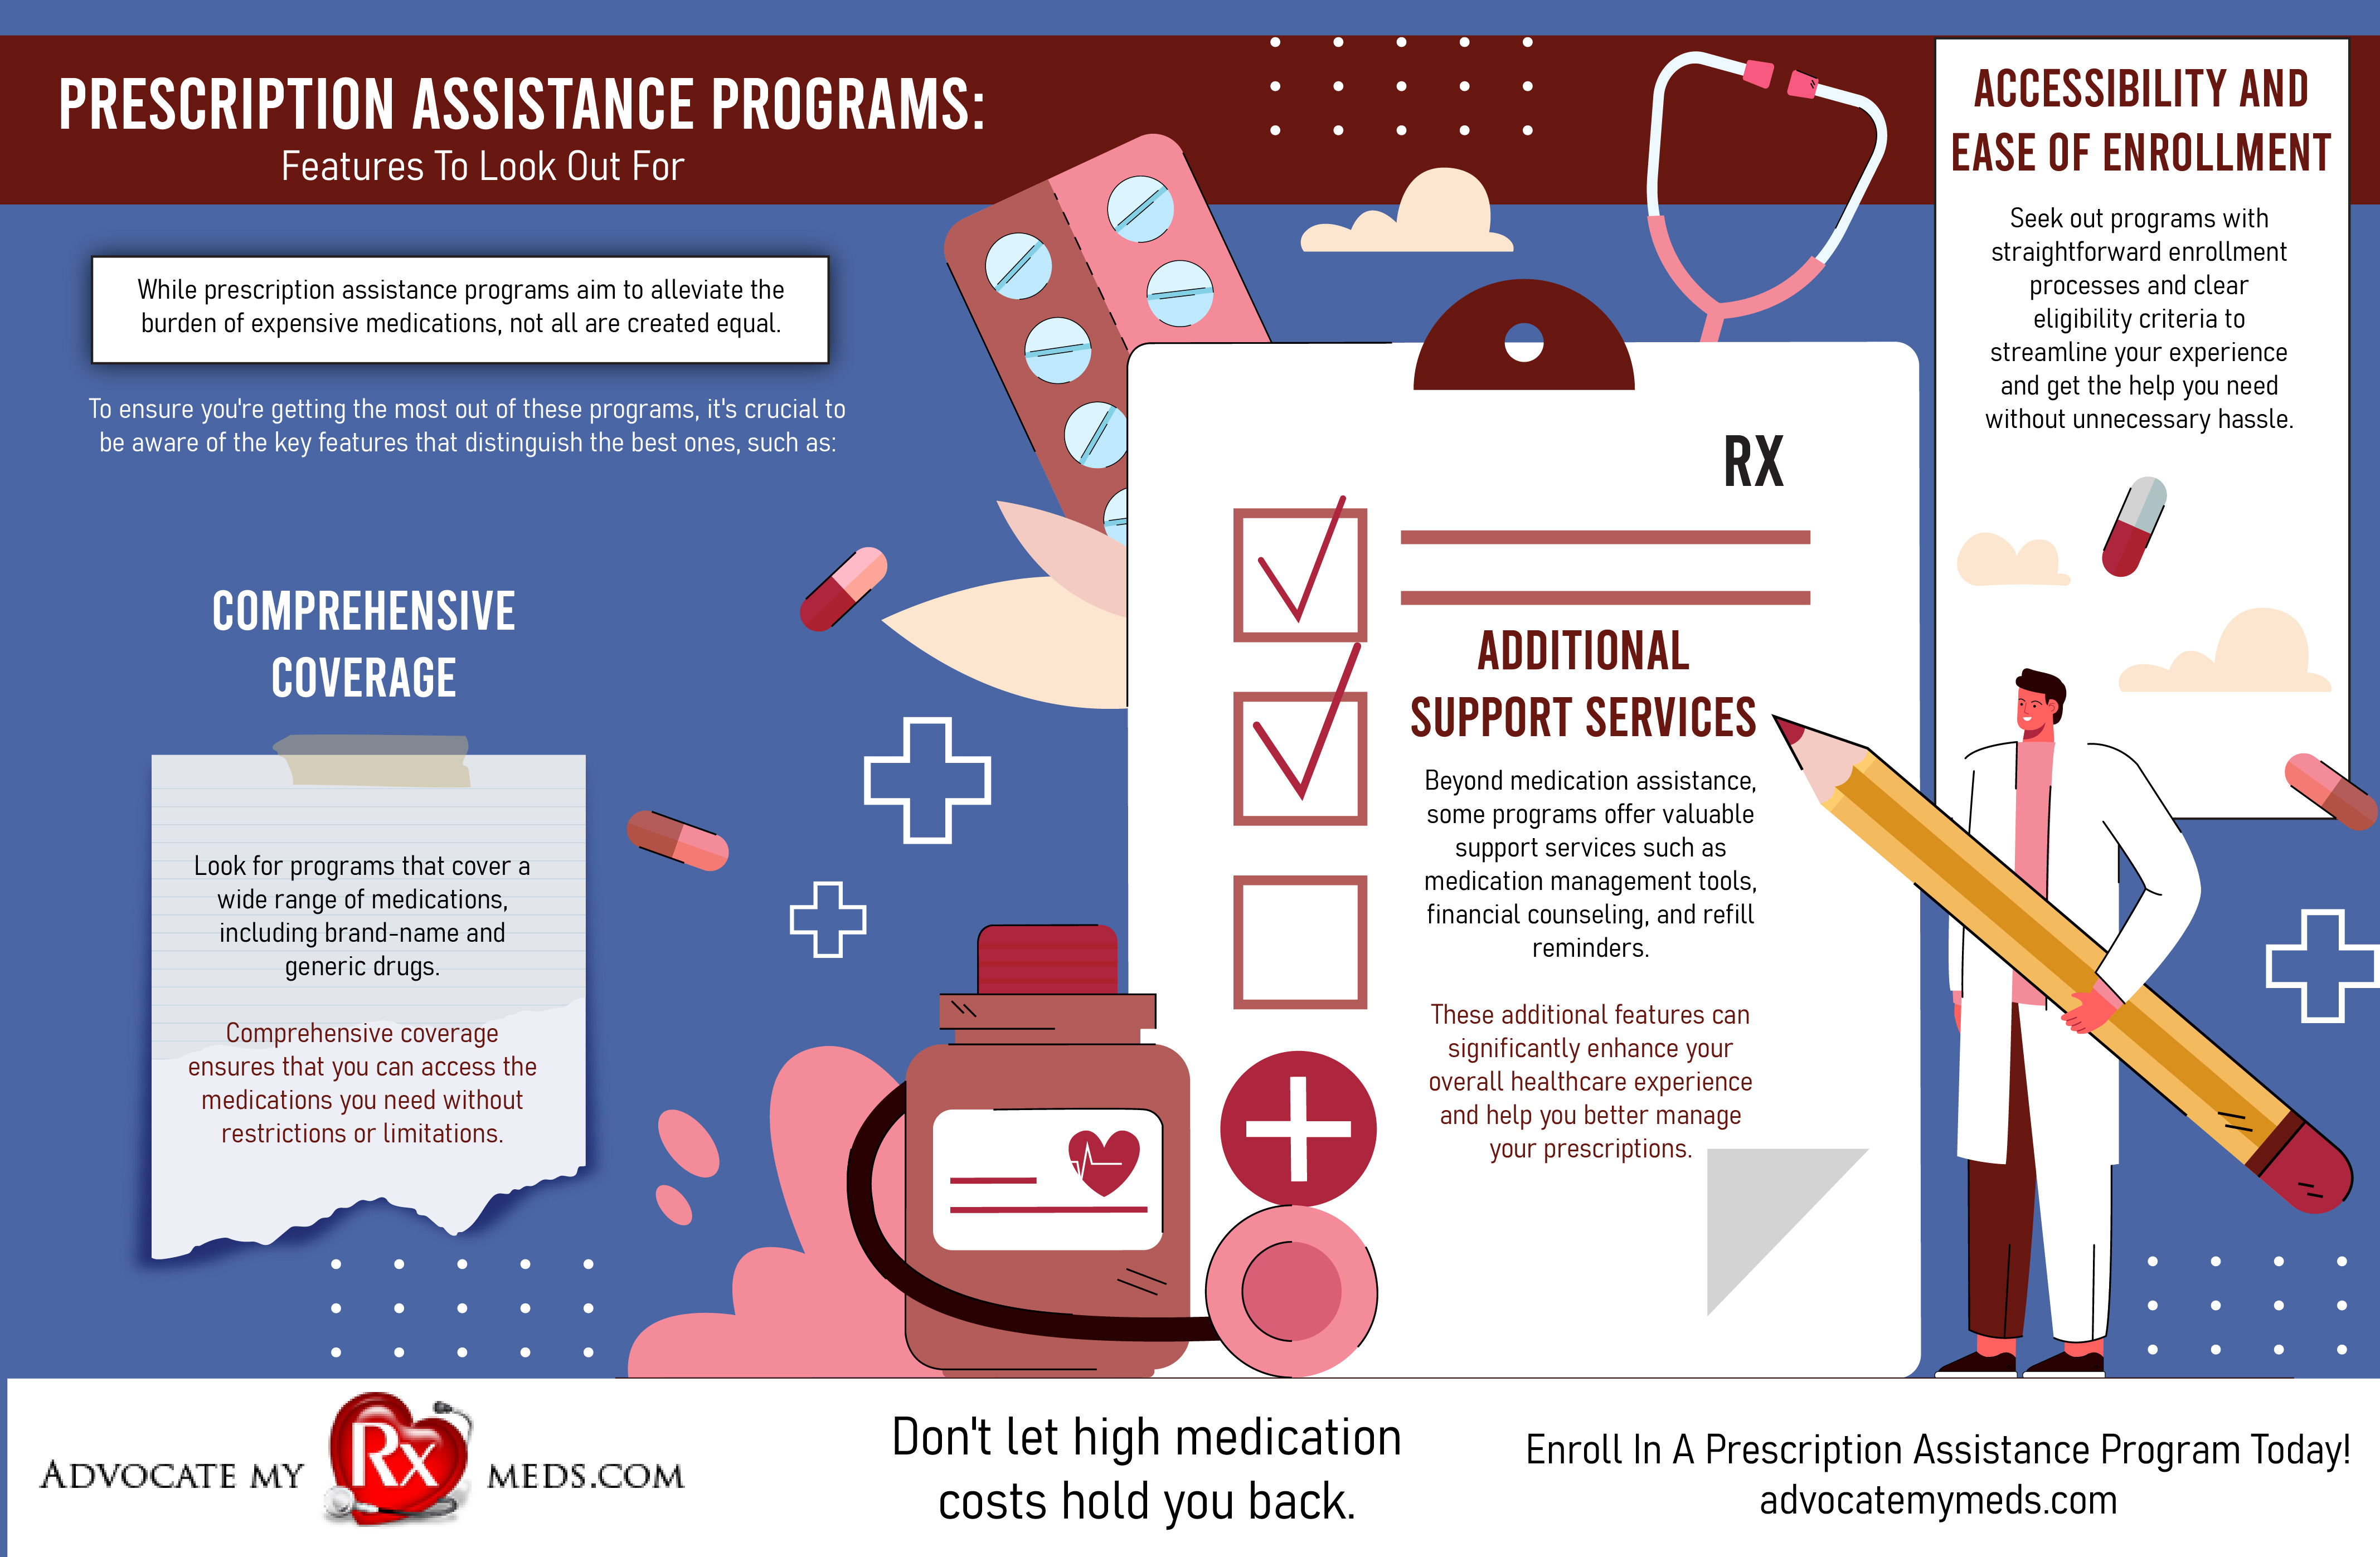 PRESCRIPTION ASSISTANCE PROGRAMS: Features To Look Out For